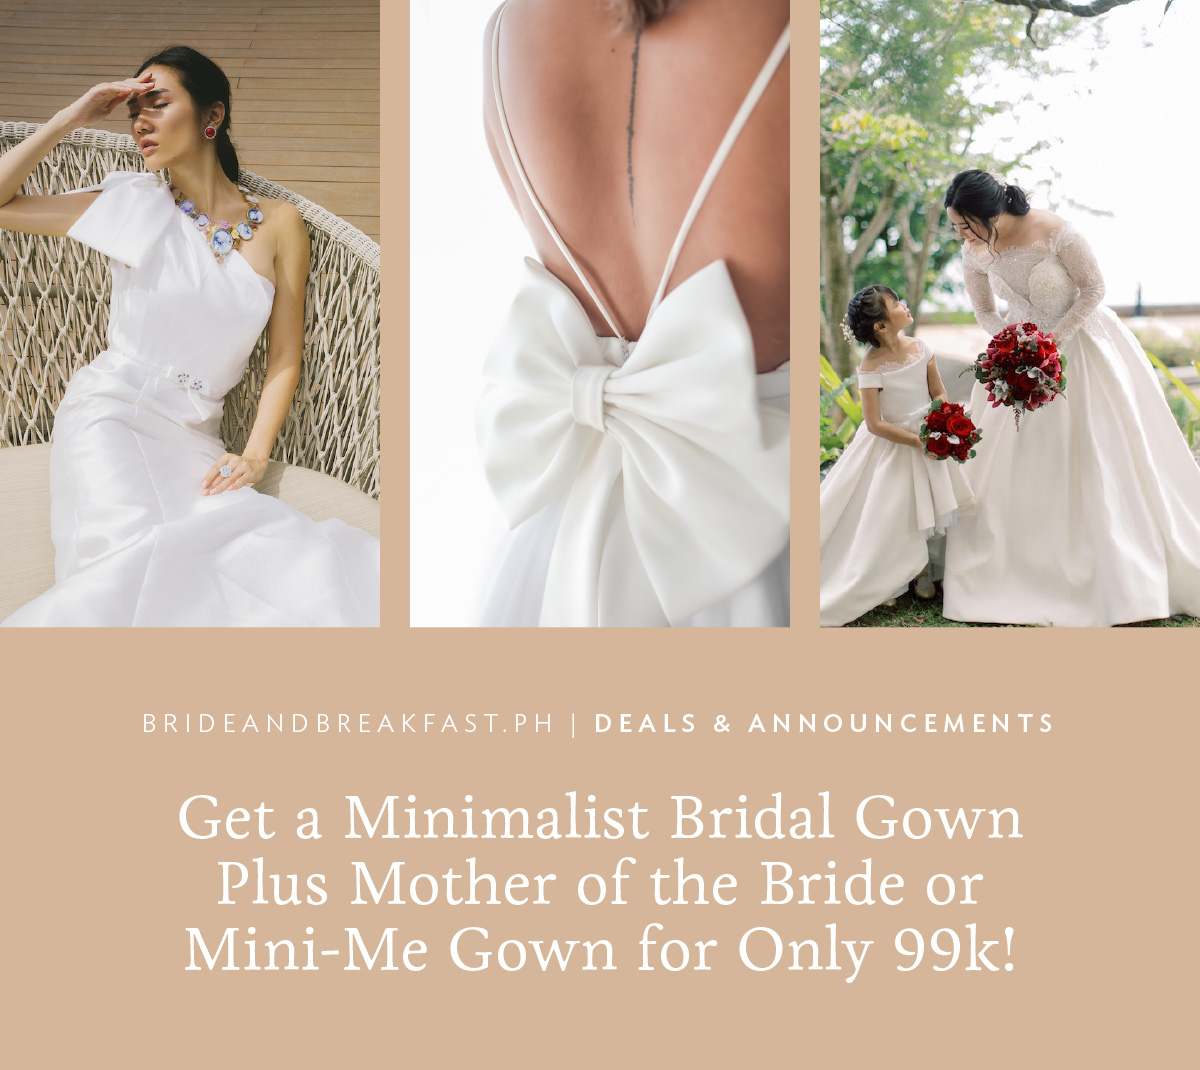 Get a Minimalist Bridal Gown Plus a Mother of the Bride or Mini-Me Gown for Only 99k!